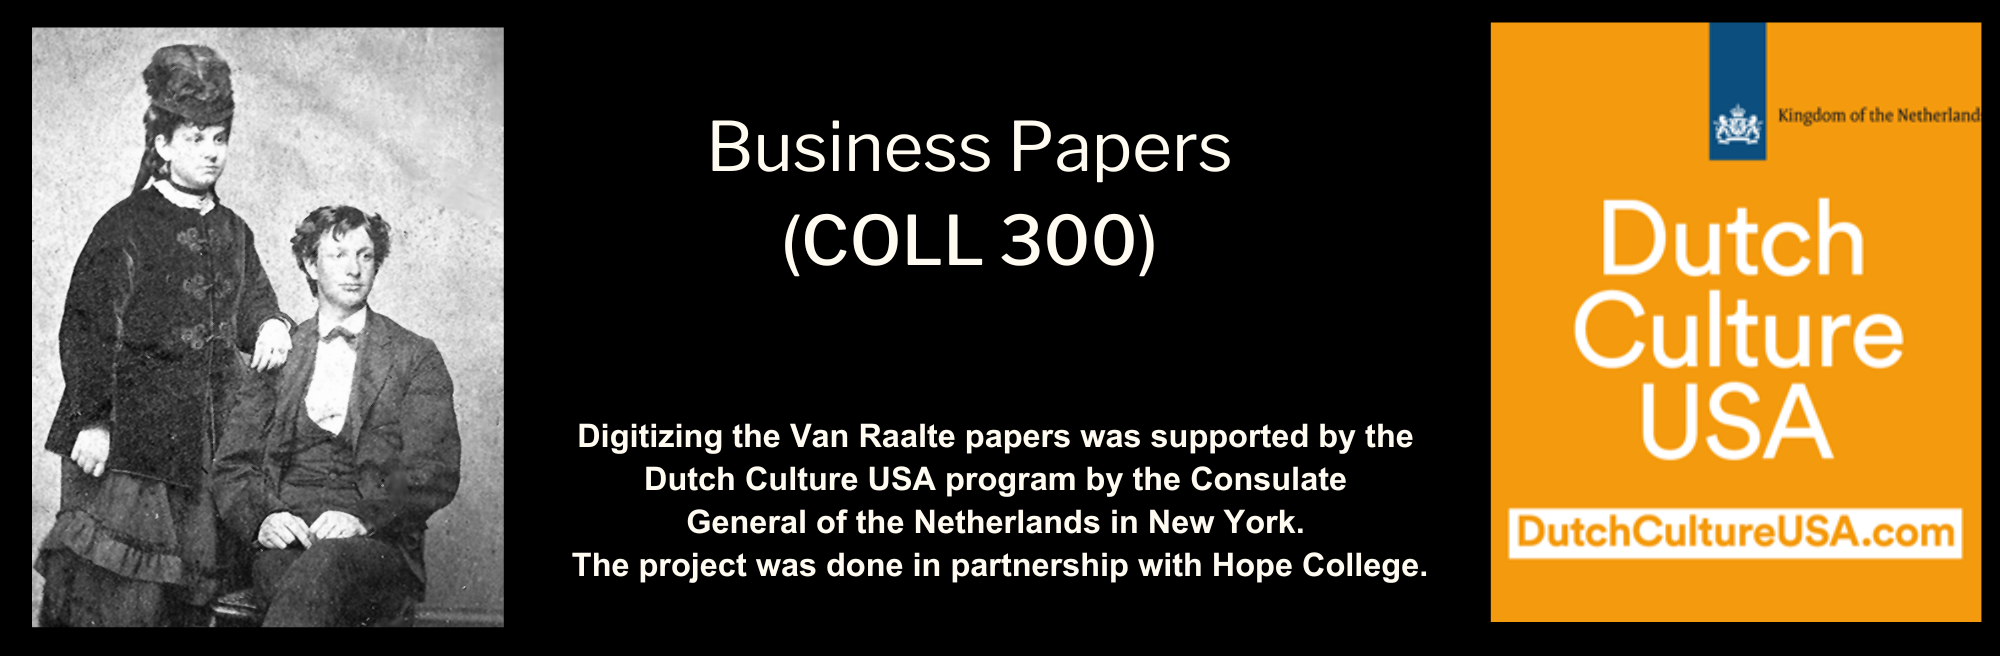 Series 07: Business Papers (COLL300)